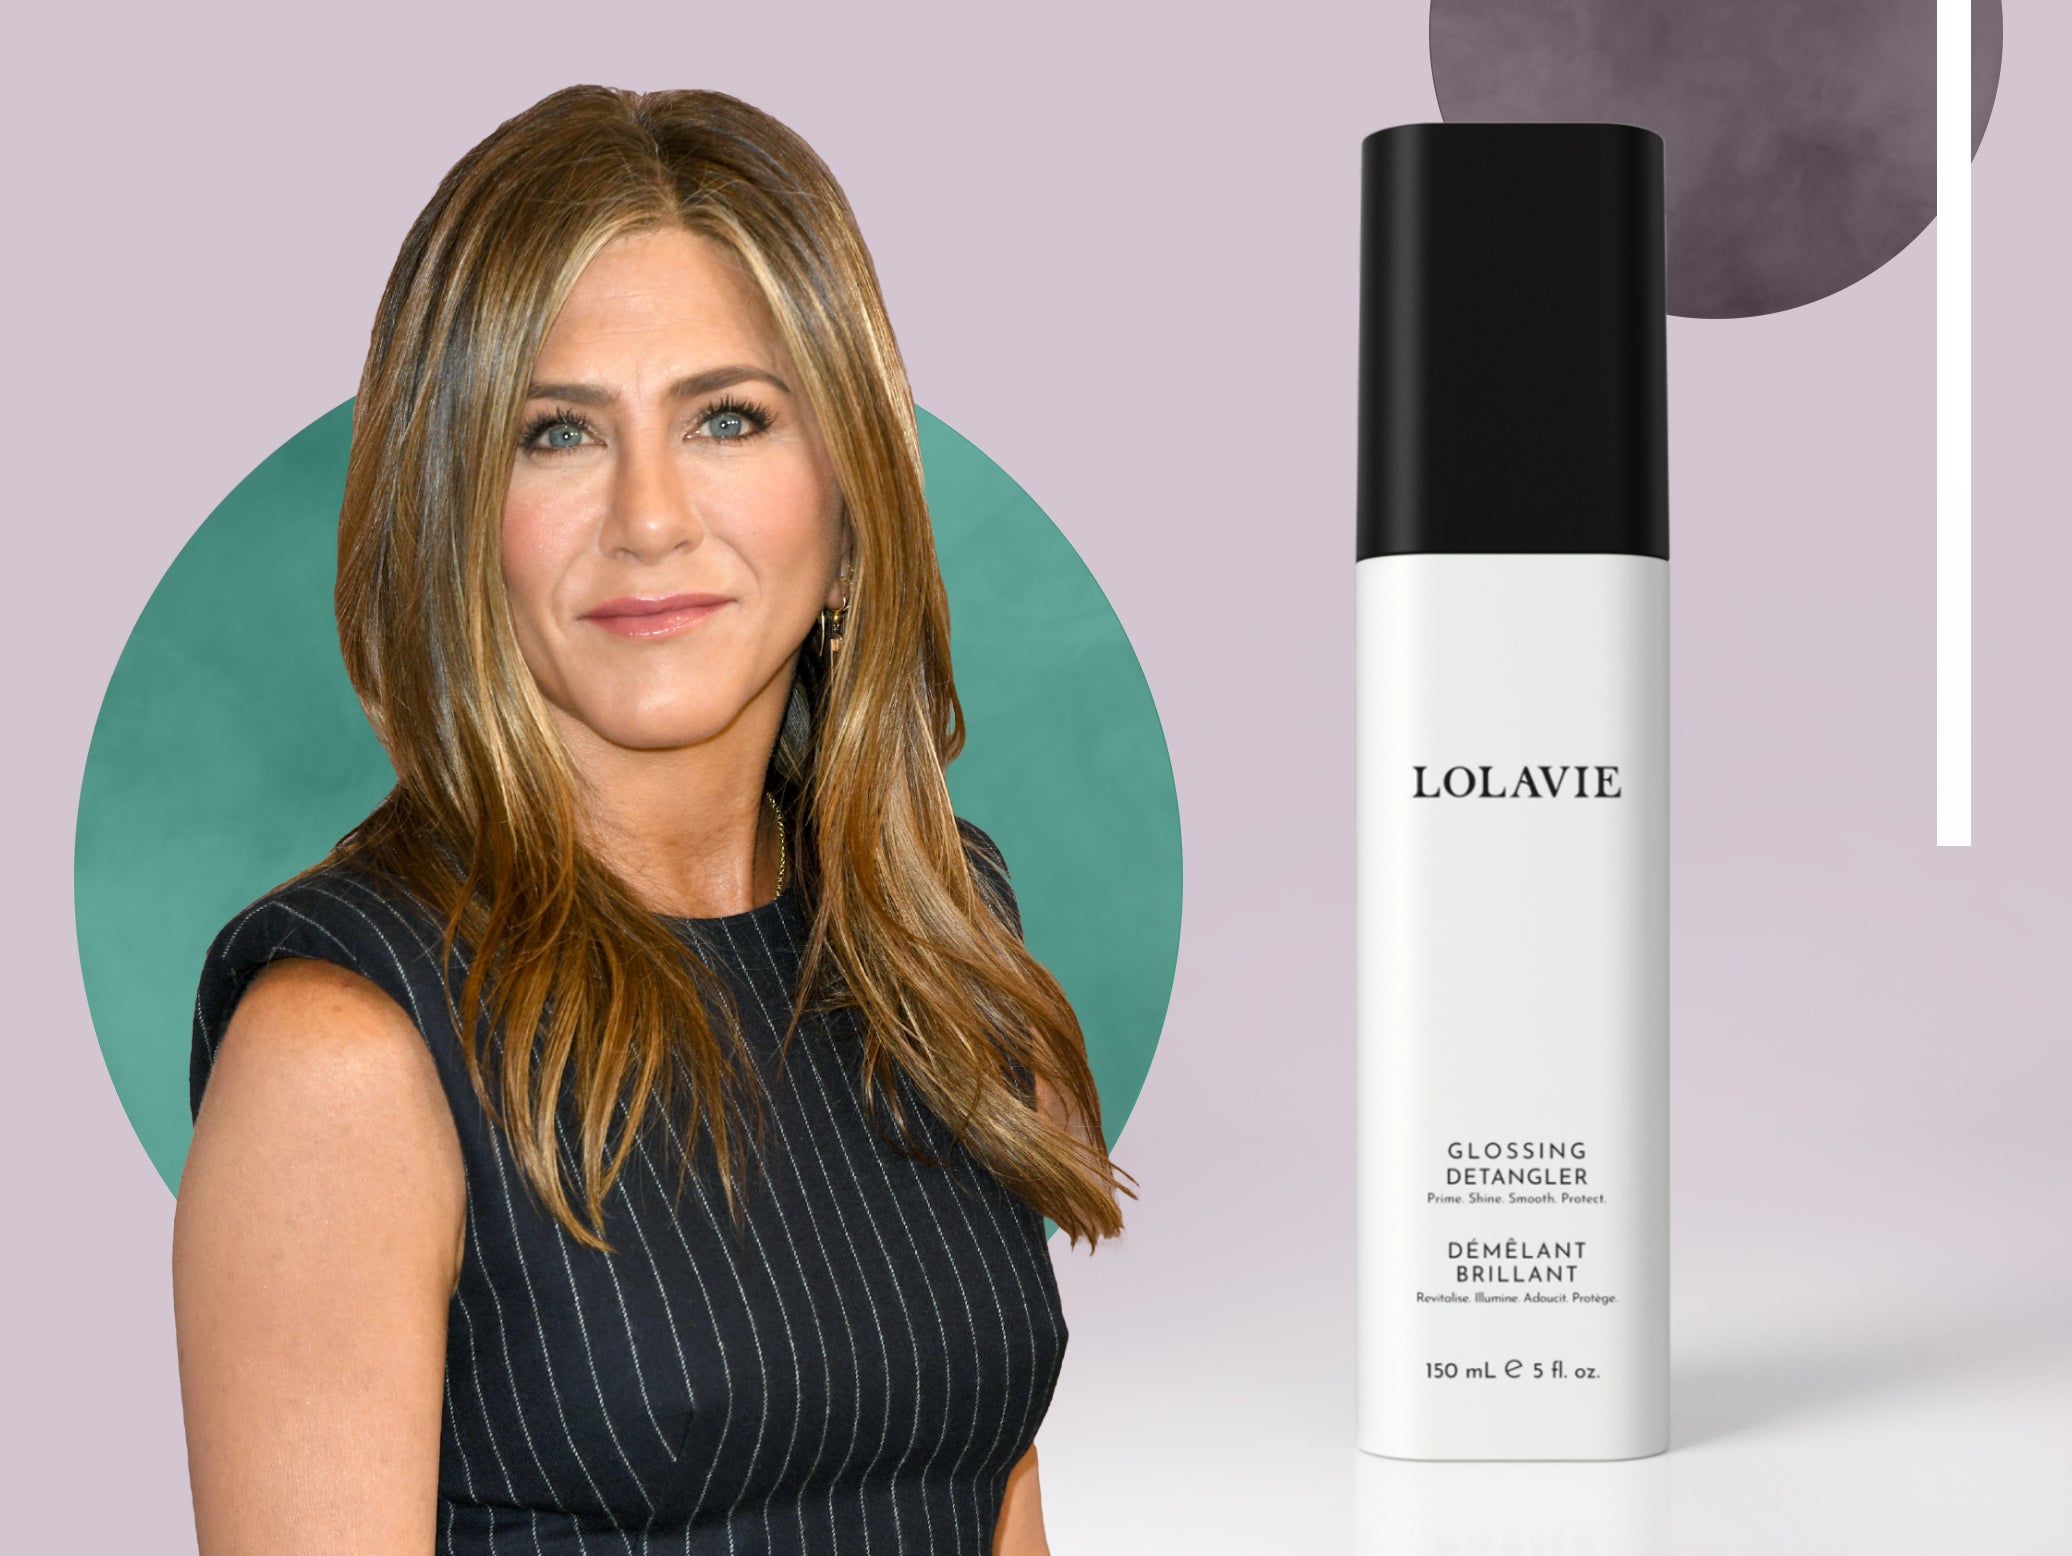 Everything we know about Jennifer Aniston's haircare brand Lolavie